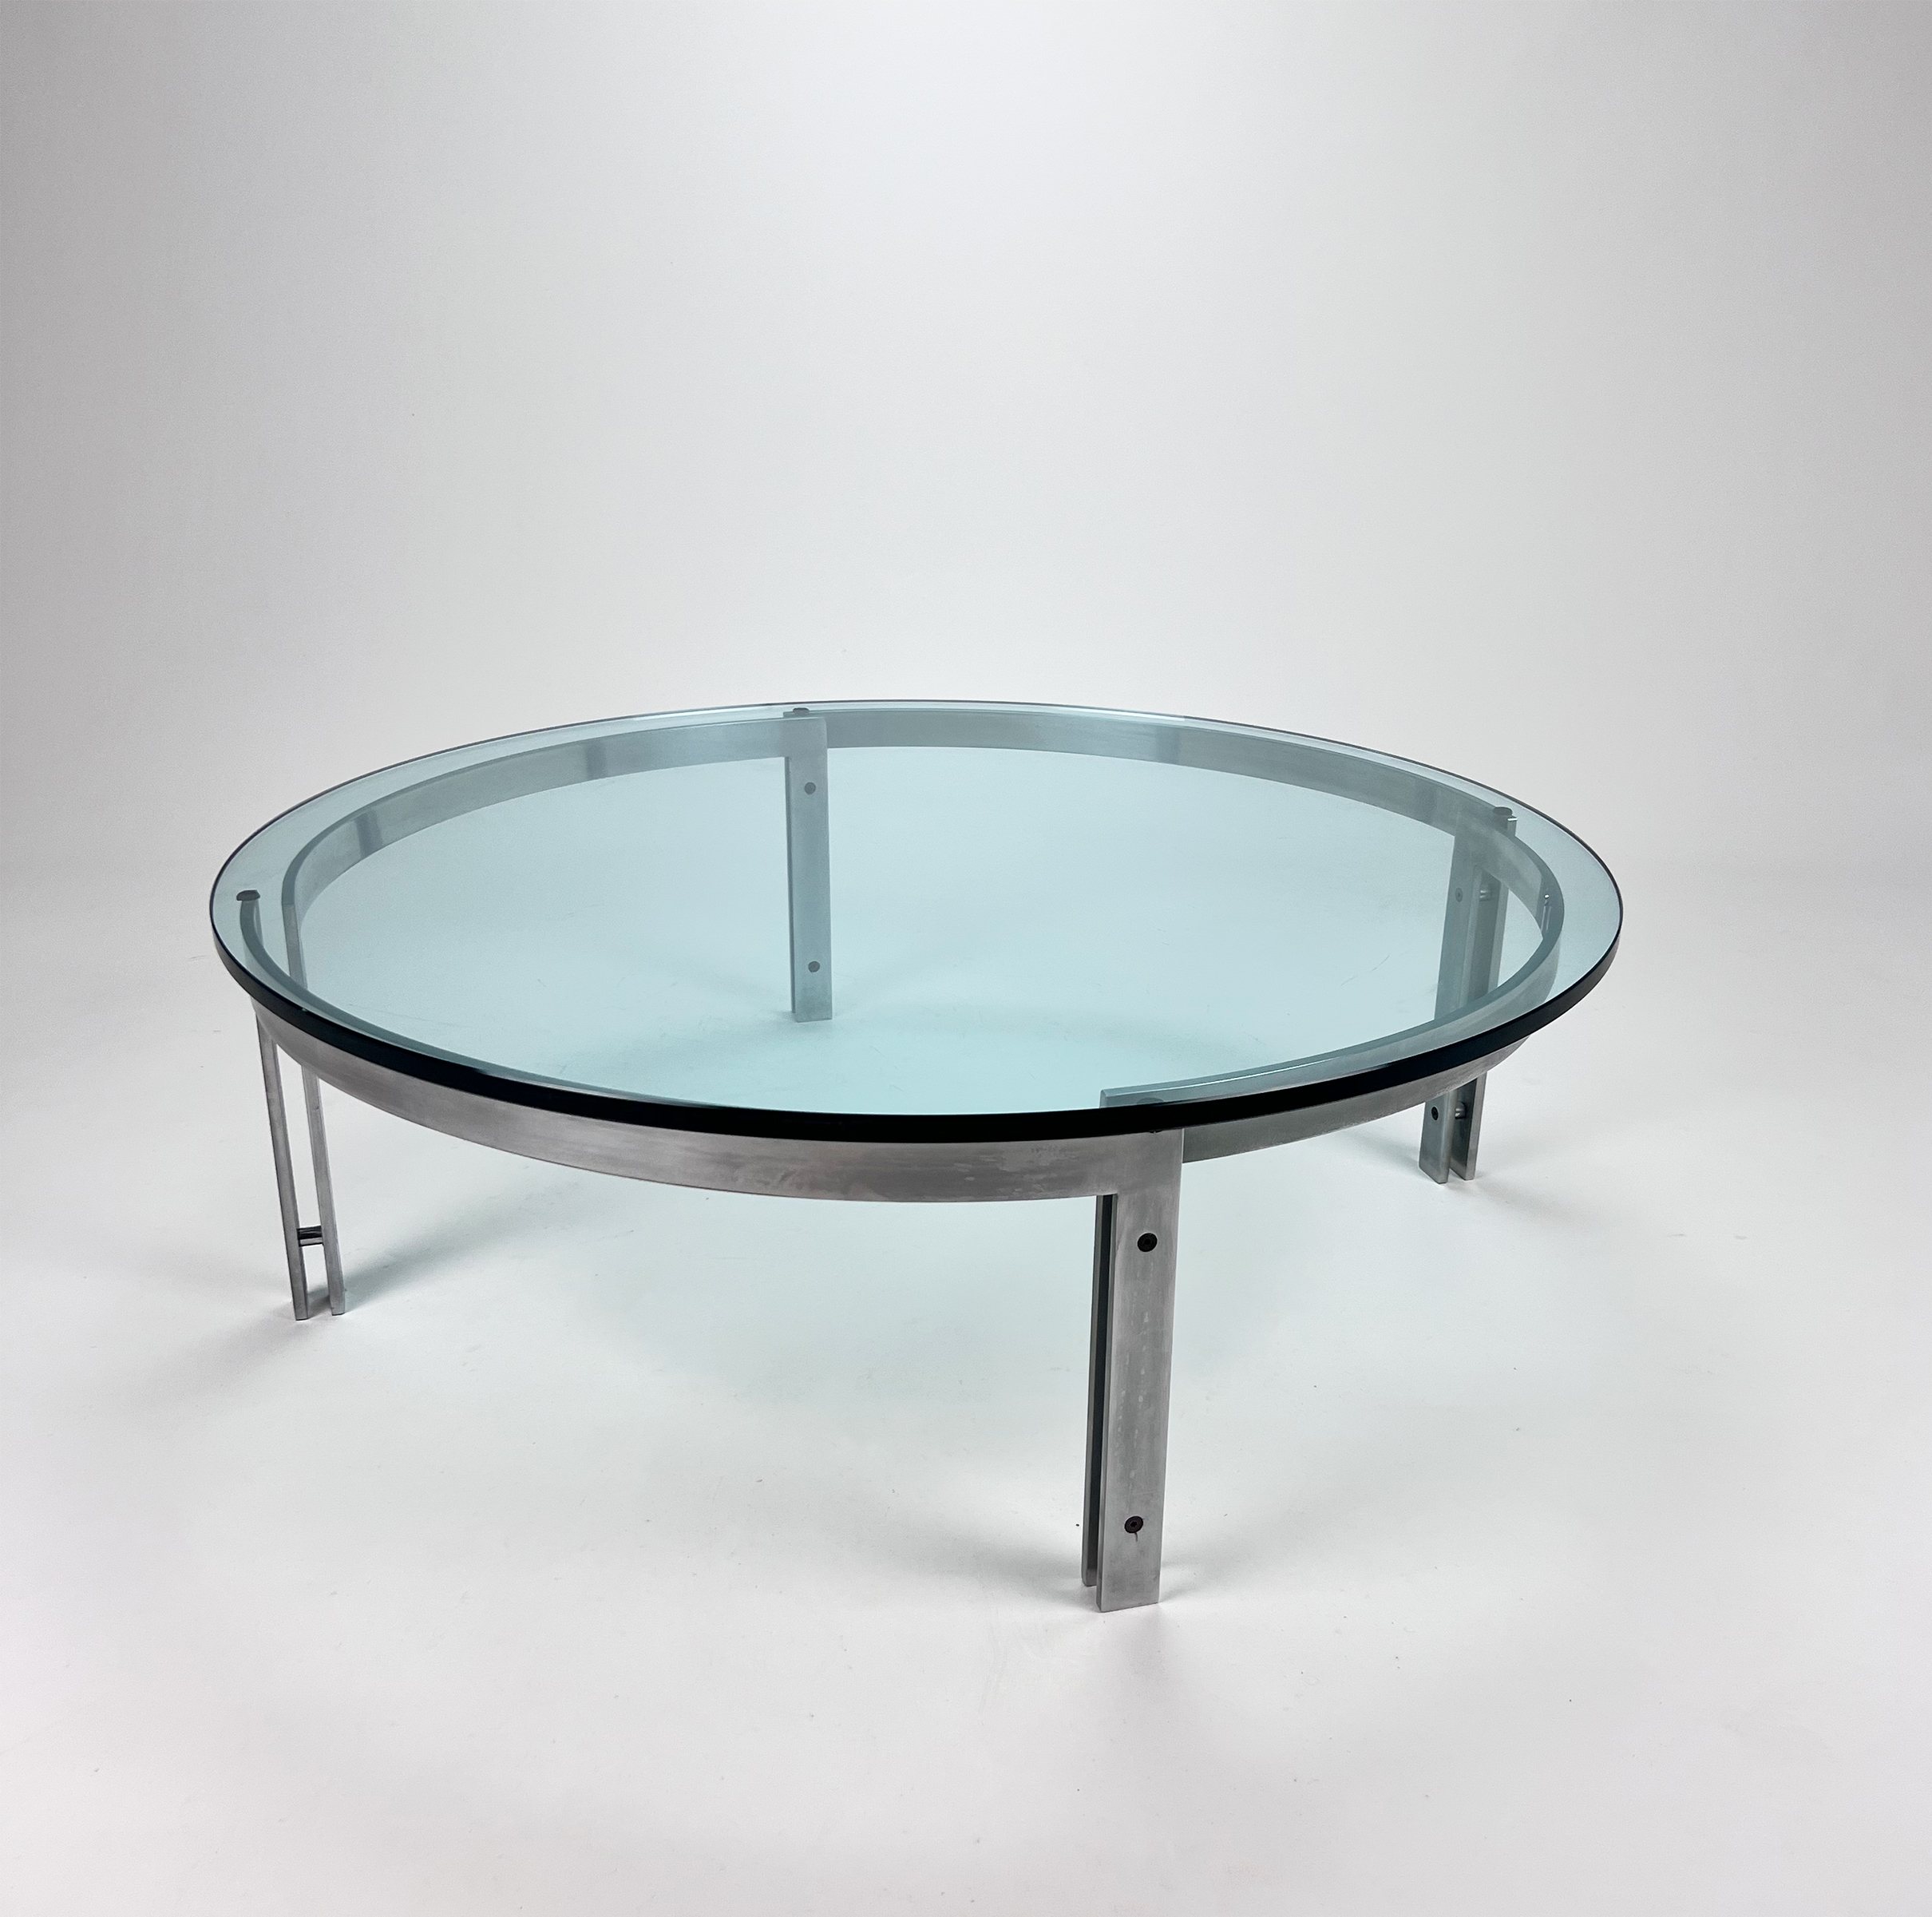 Round Coffeetable by Hank Kwint for Metaform, 1970s